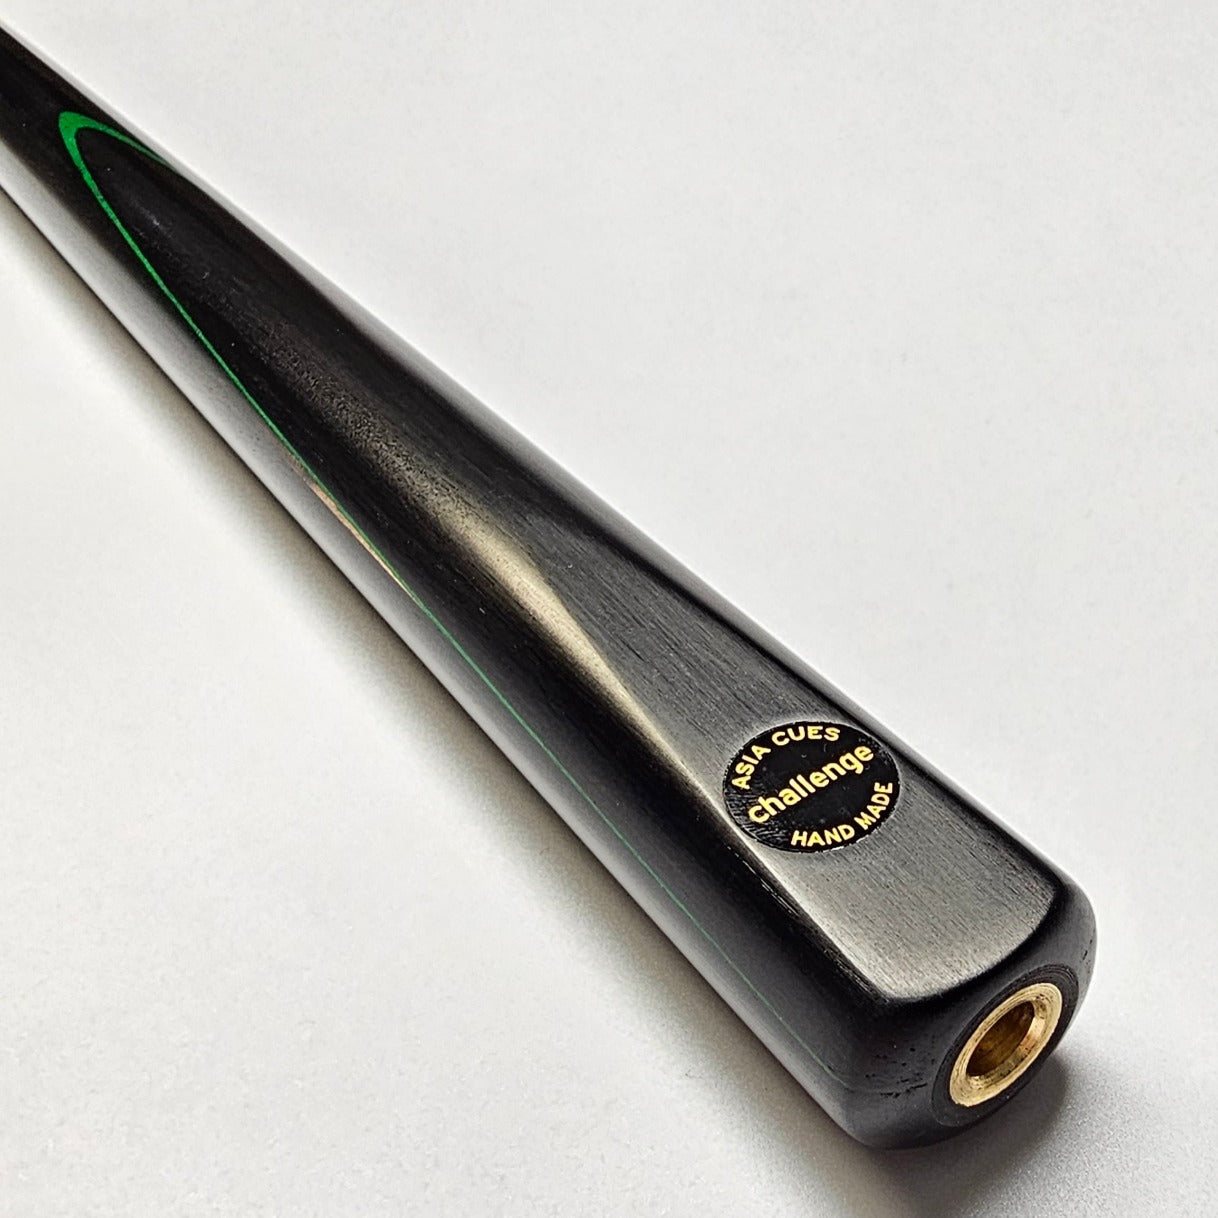 Asia Cues Challenge Range One Piece Cue Ash Shaft Ebony Butt with Green veneer. Badge View